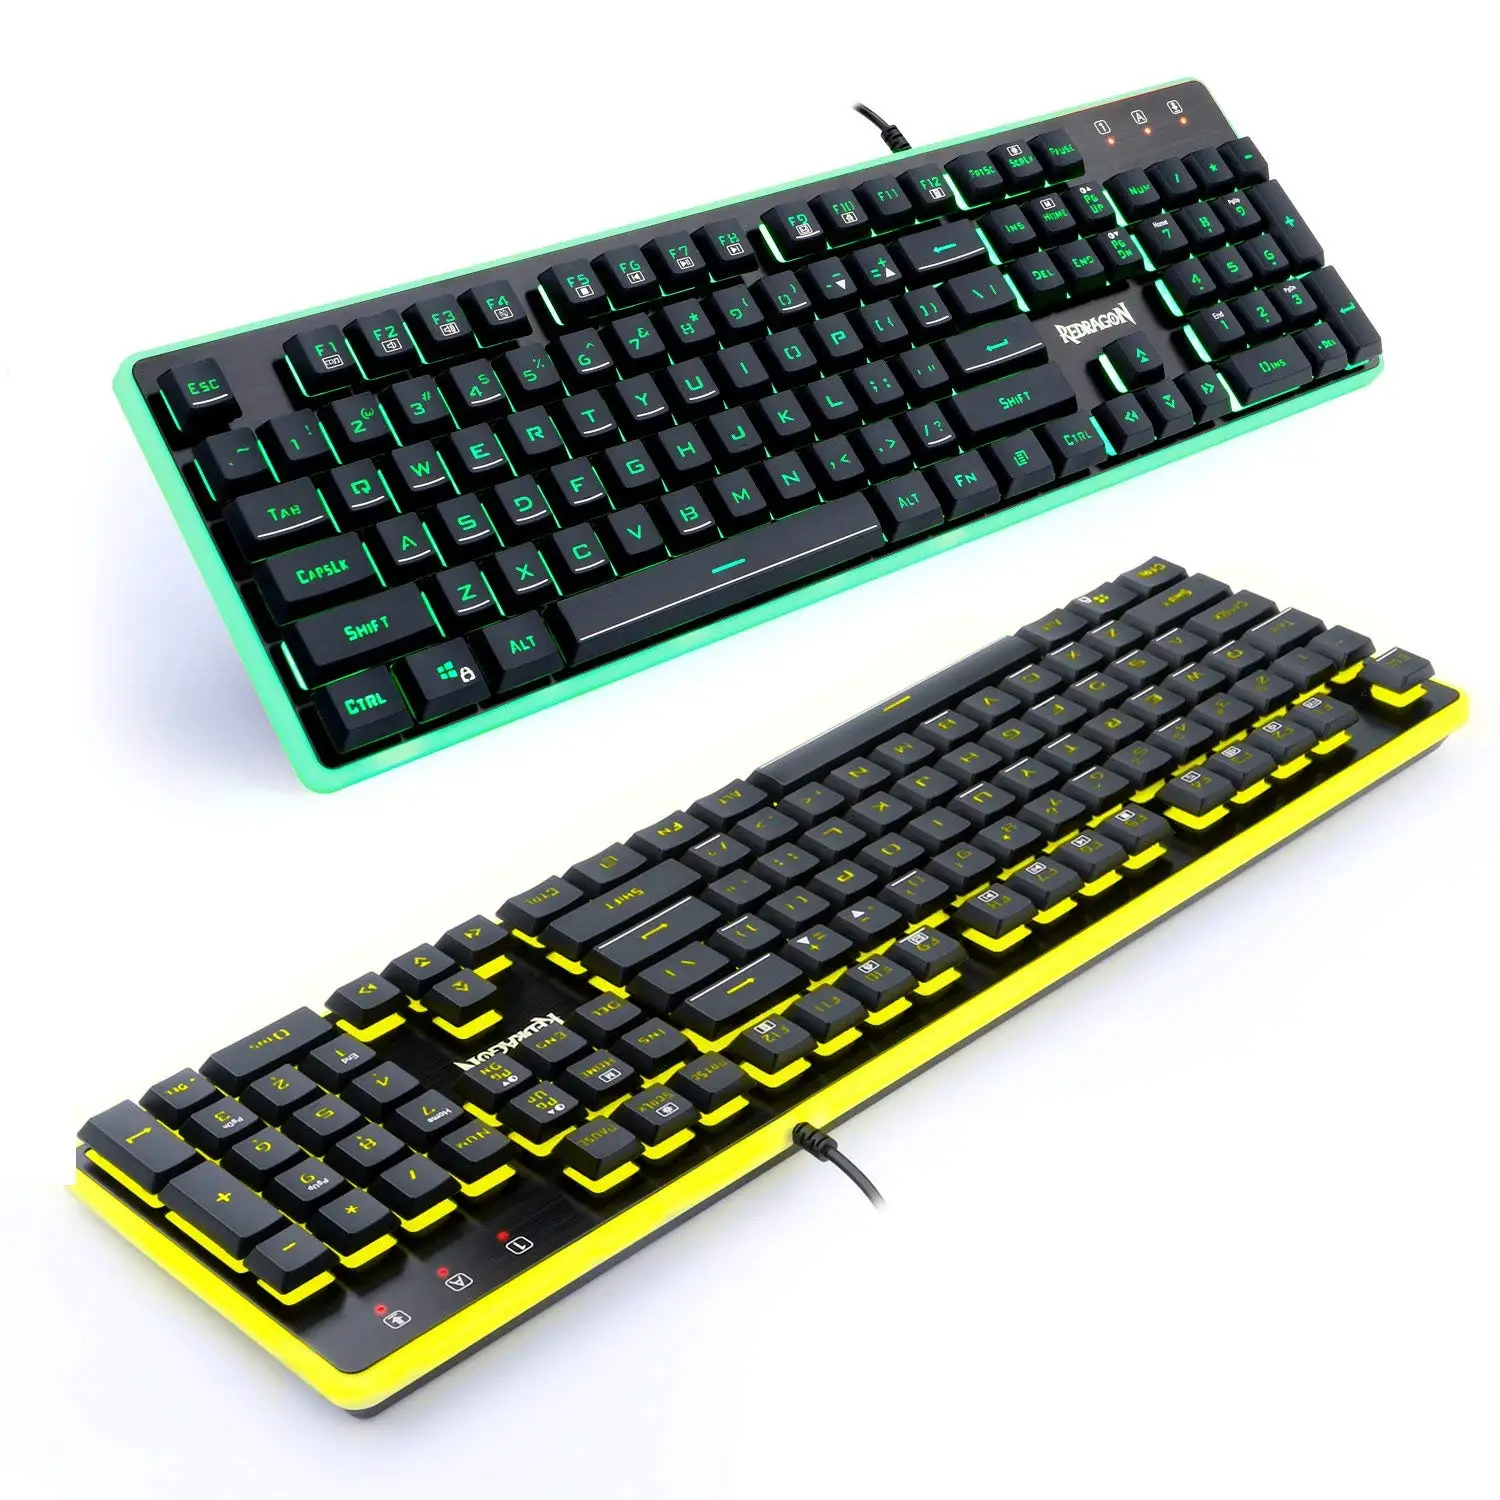 7 colors backlight keyboard K509 and backlight  mouse M608 and mousepad P016 gaming Combos